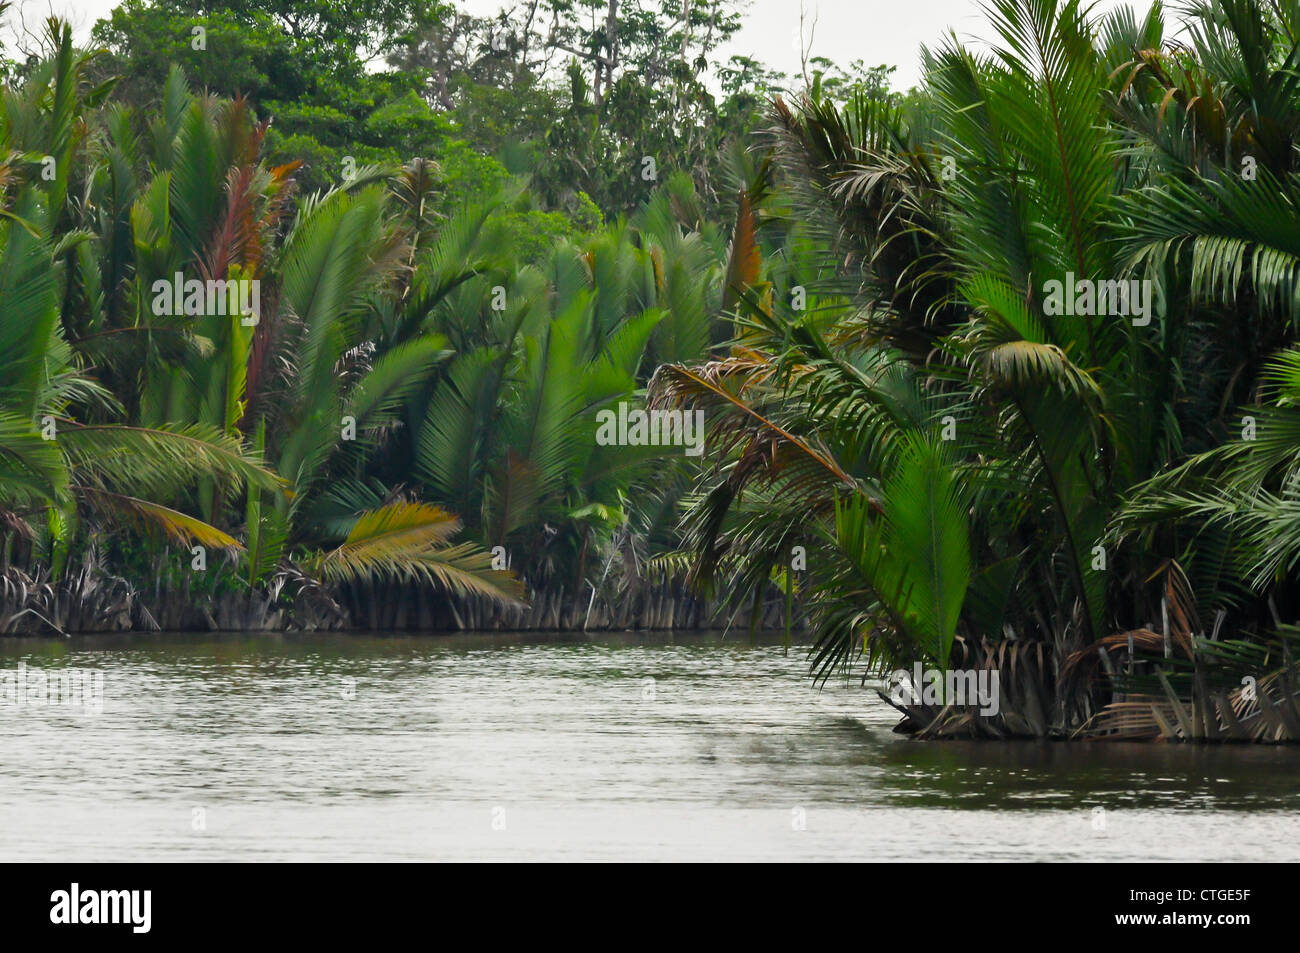 Green tropical rainforest vegetation on the banks of the Sekonyer River, Tanjung Puting National Park, Borneo. Stock Photo